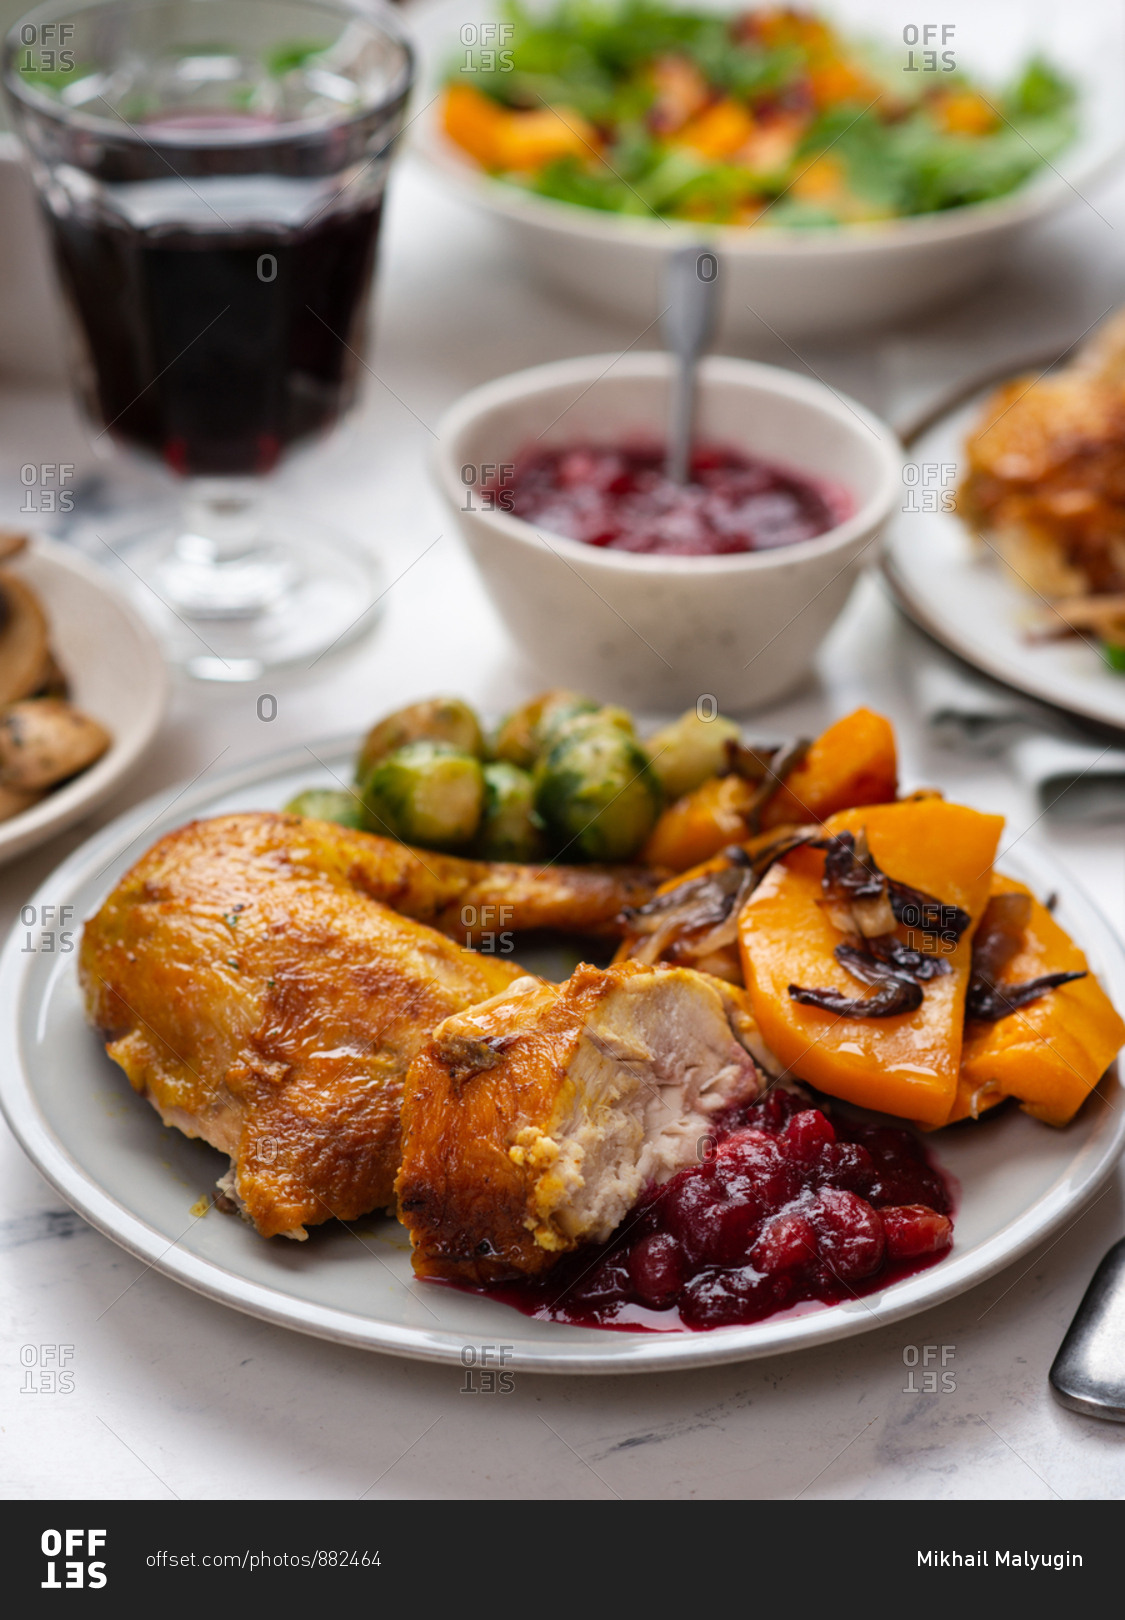 Thanksgiving dinner with roasted chicken and sides stock photo - OFFSET